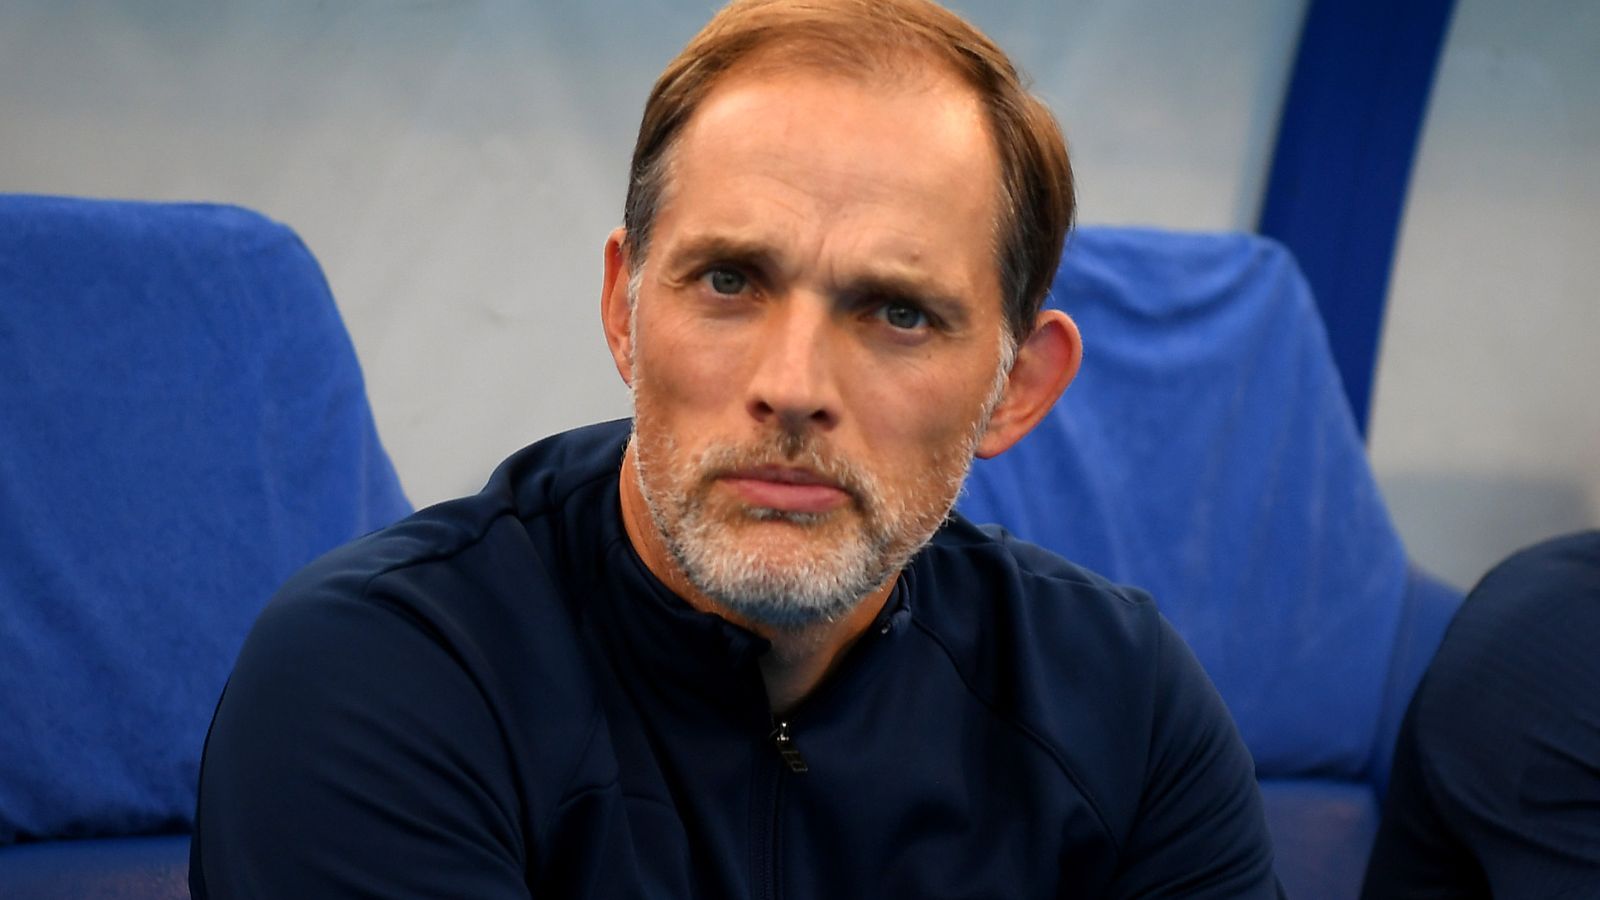 Thomas Tuchel sacked by Chelsea: Where did it go wrong for the head coach at Stamford Bridge?